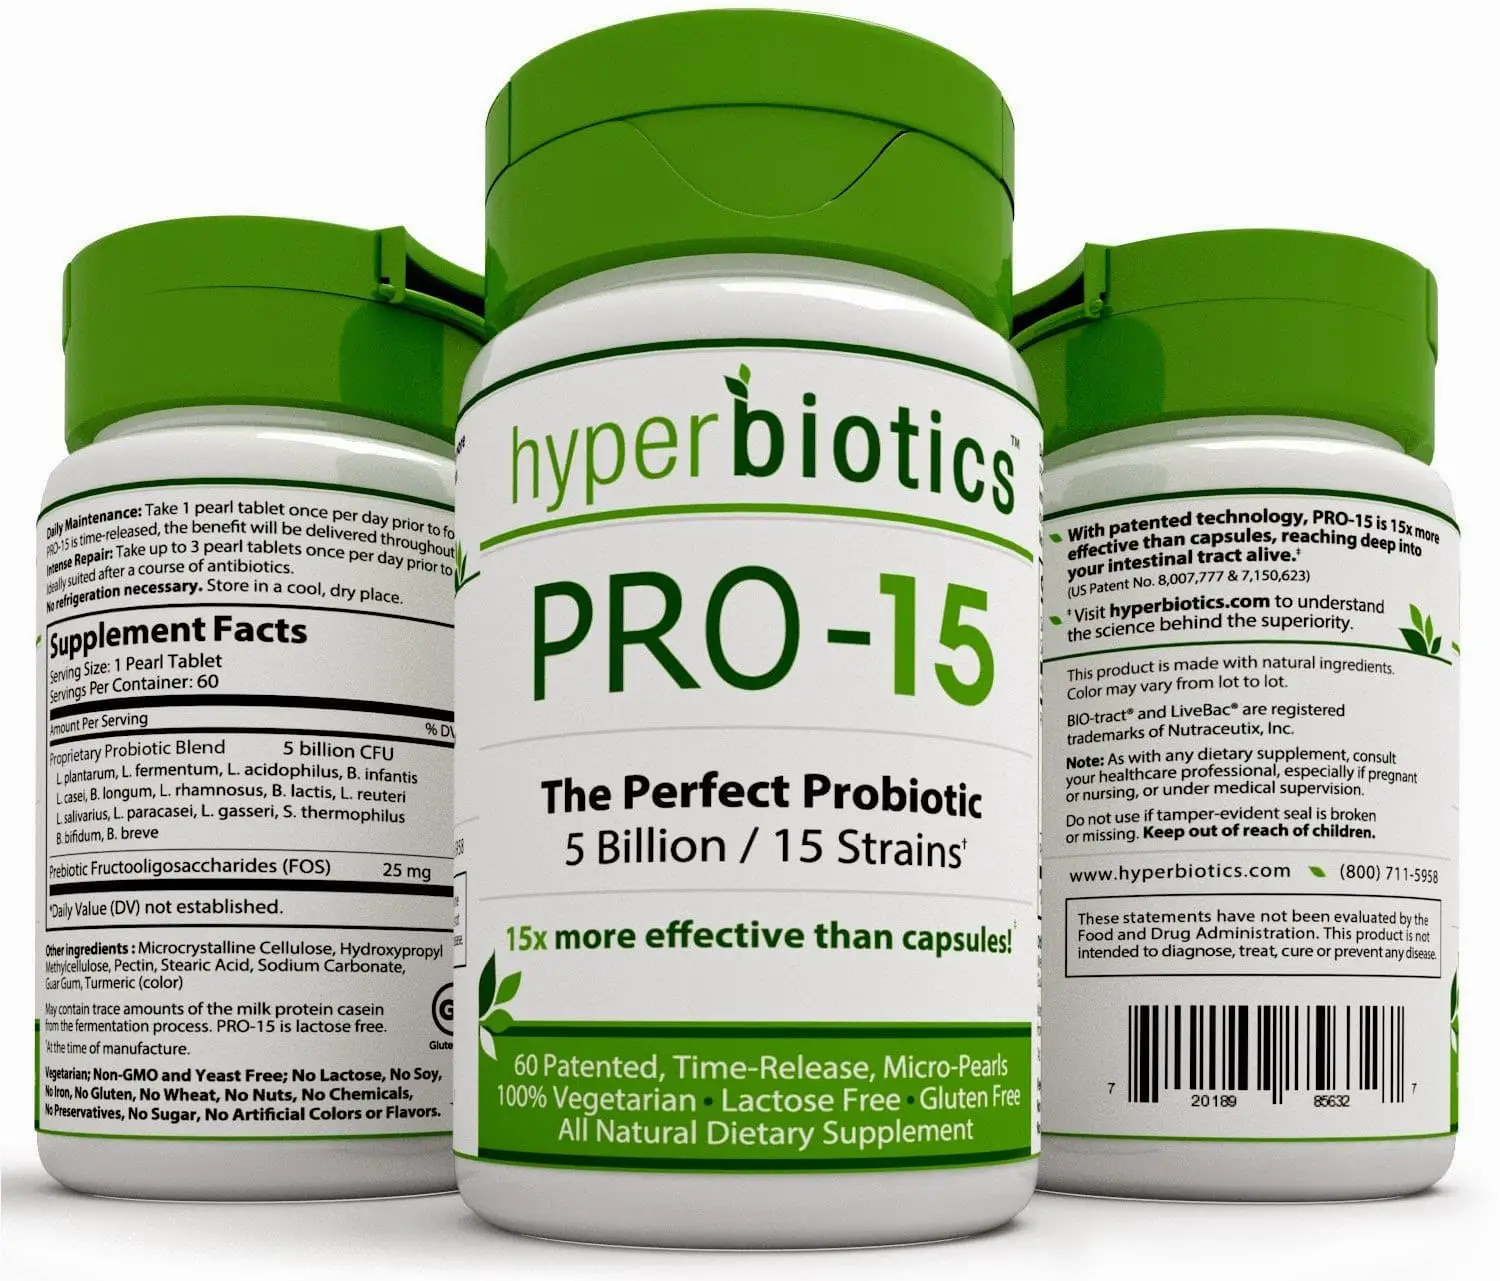 Popular Product Reviews by Amy: PRO 15 Probiotic by Hyperbiotics